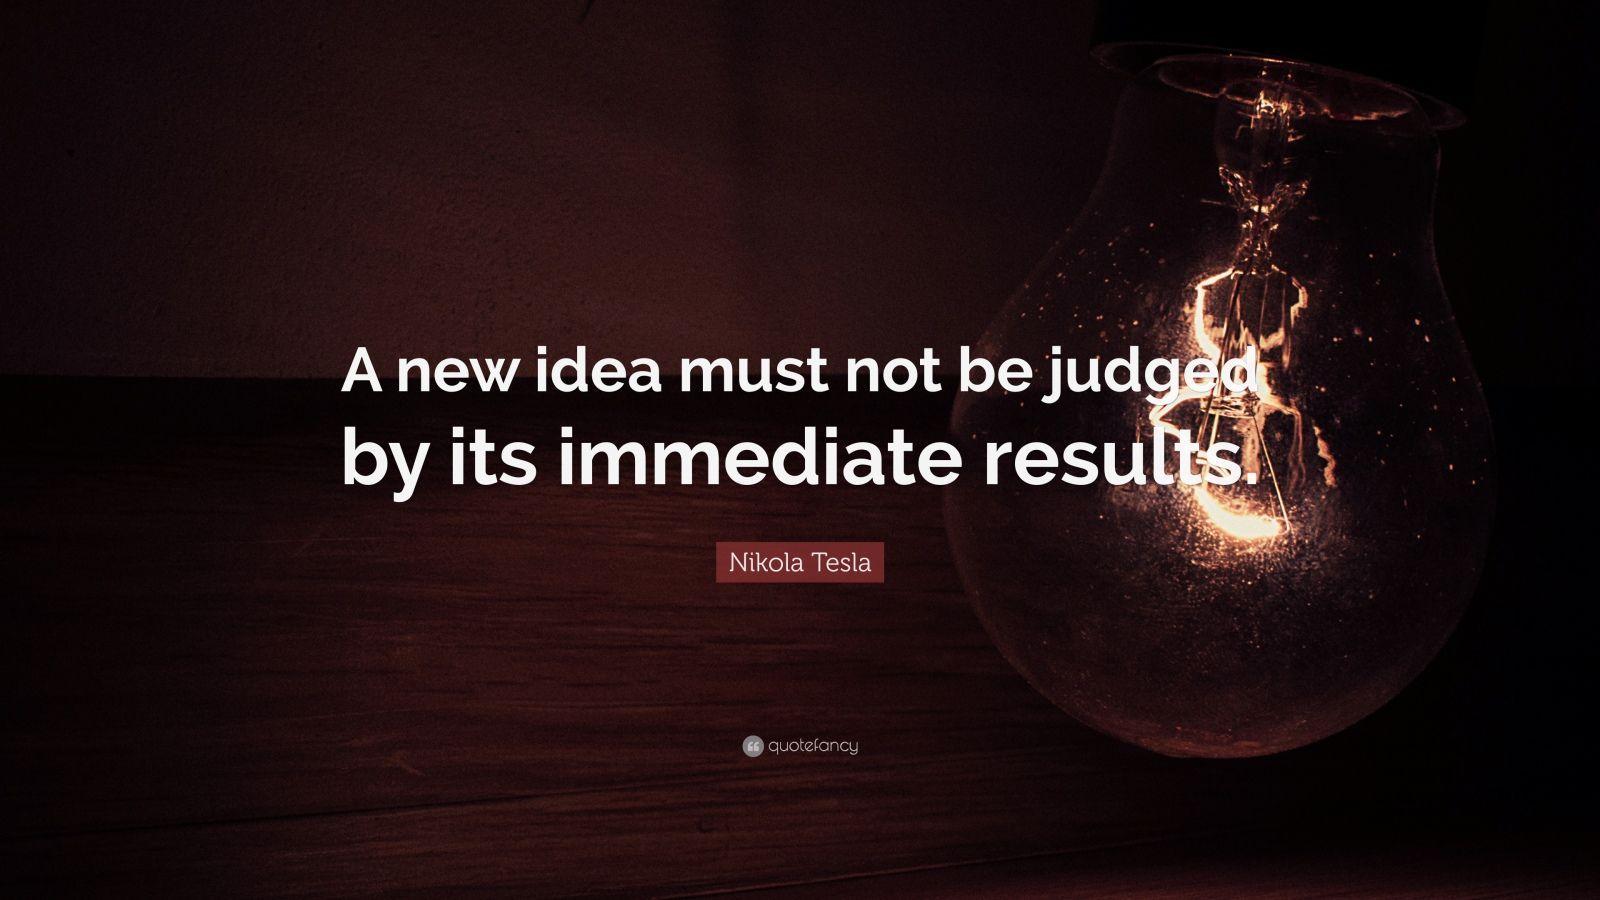 Nikola Tesla Quote: “A new idea must not be judged